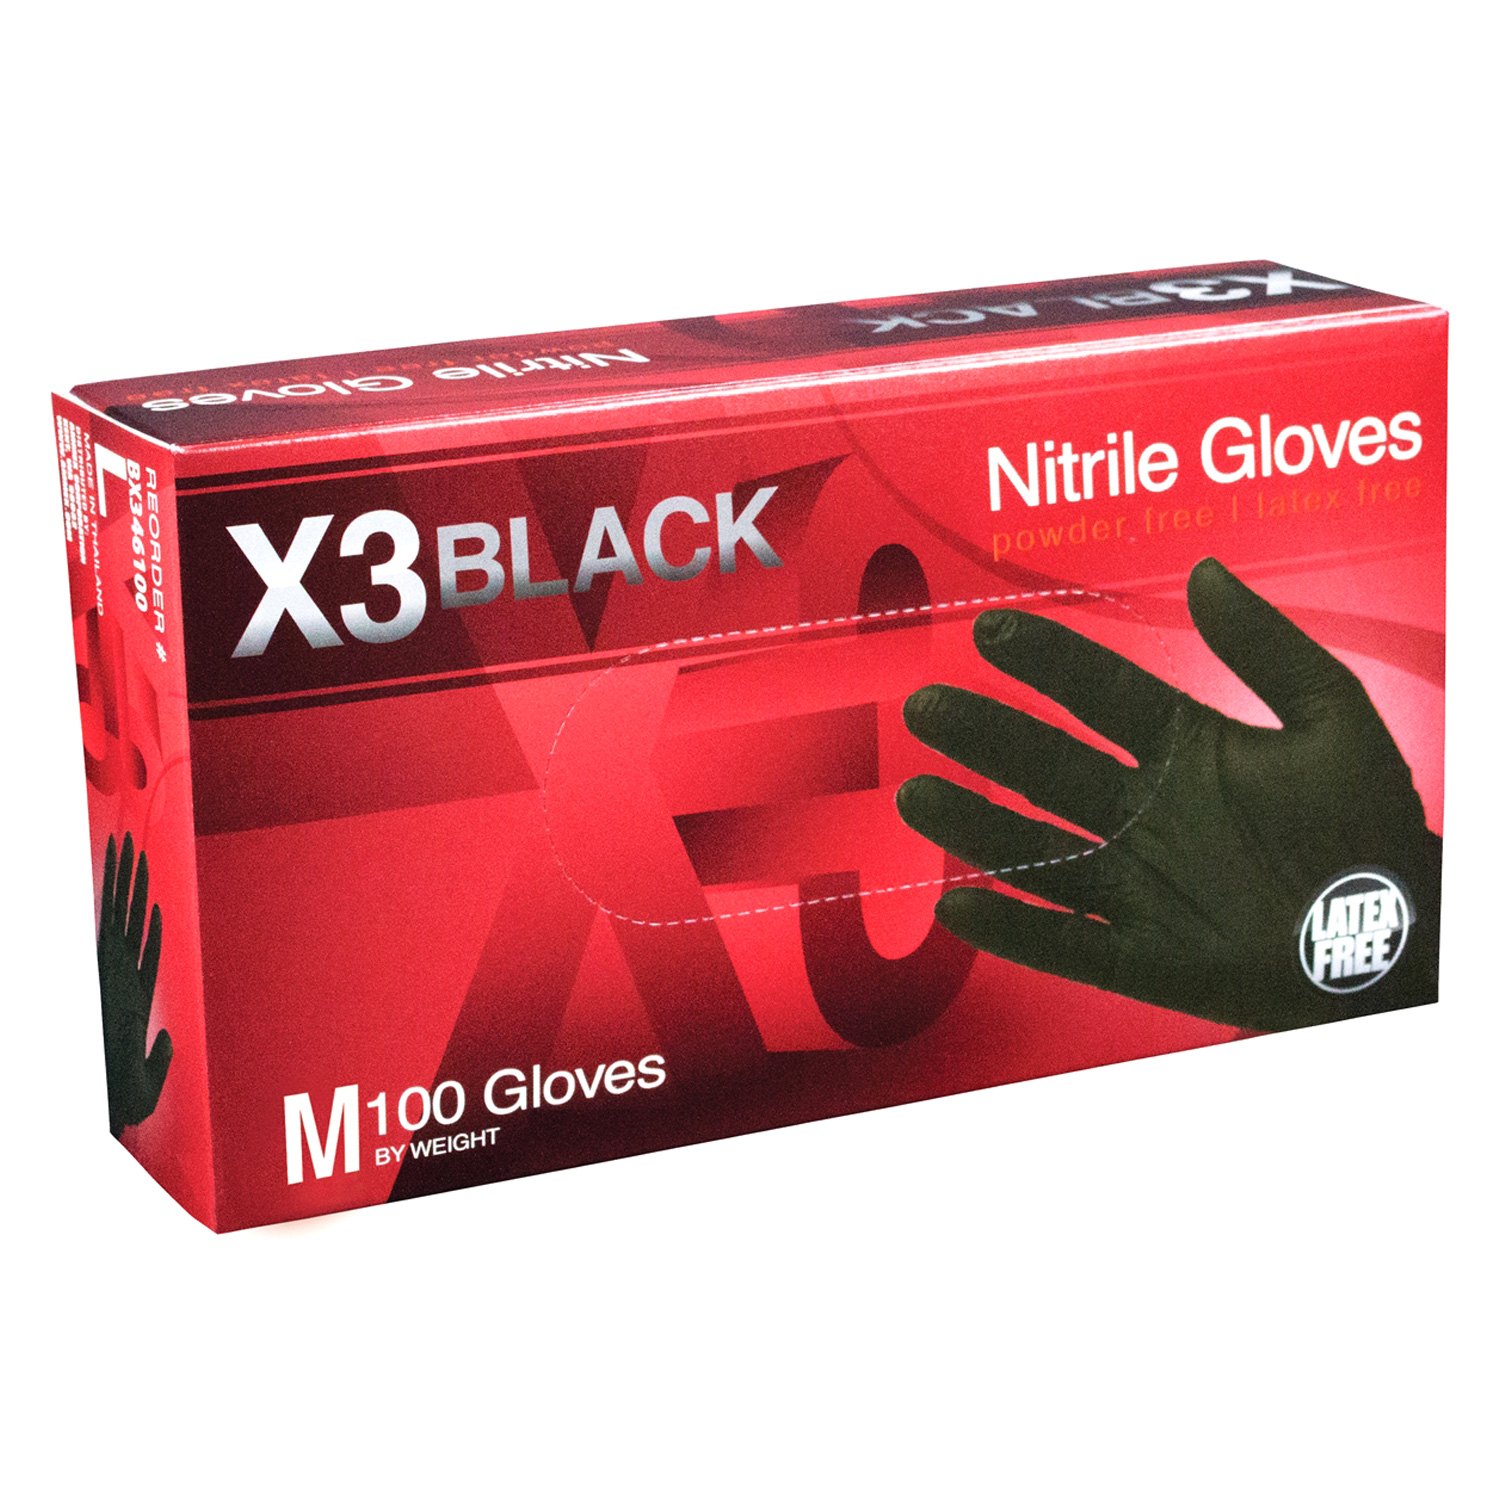 Box of 100 AMMEX BX3 Black Nitrile Industrial Latex Free Disposable Gloves 